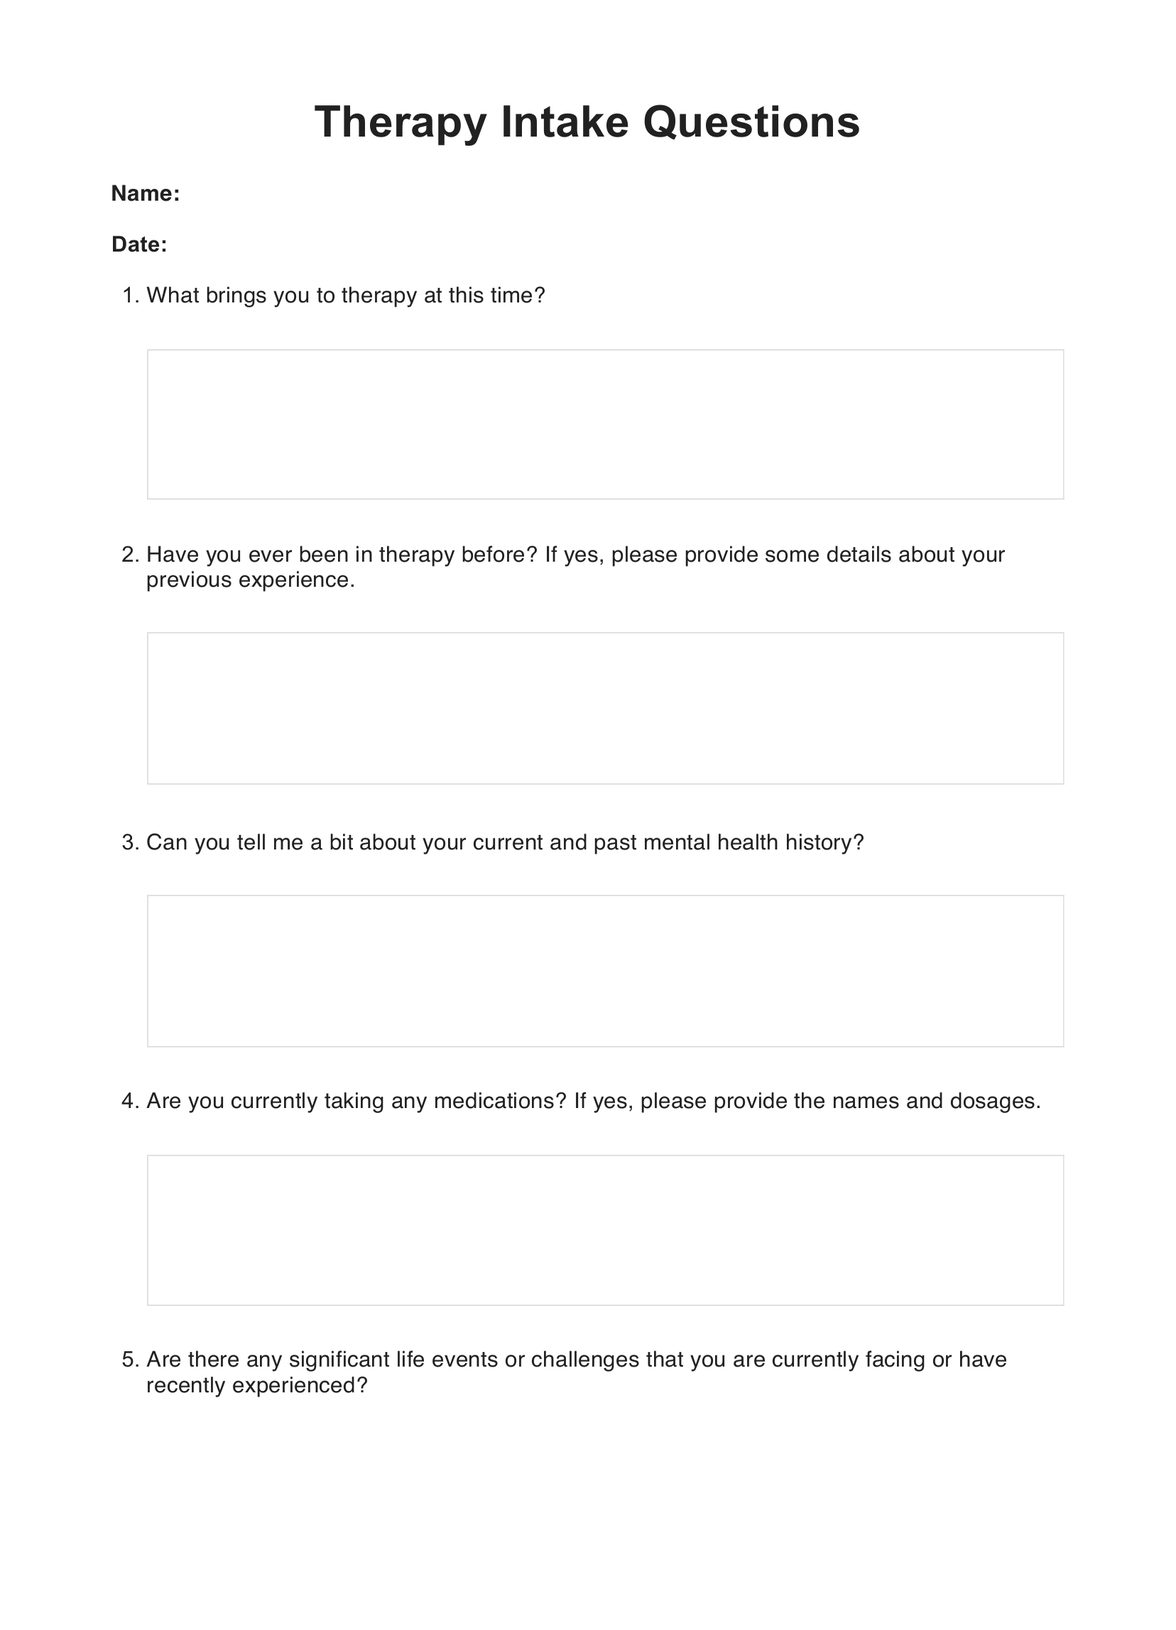 Therapy Intake Questions PDF Example